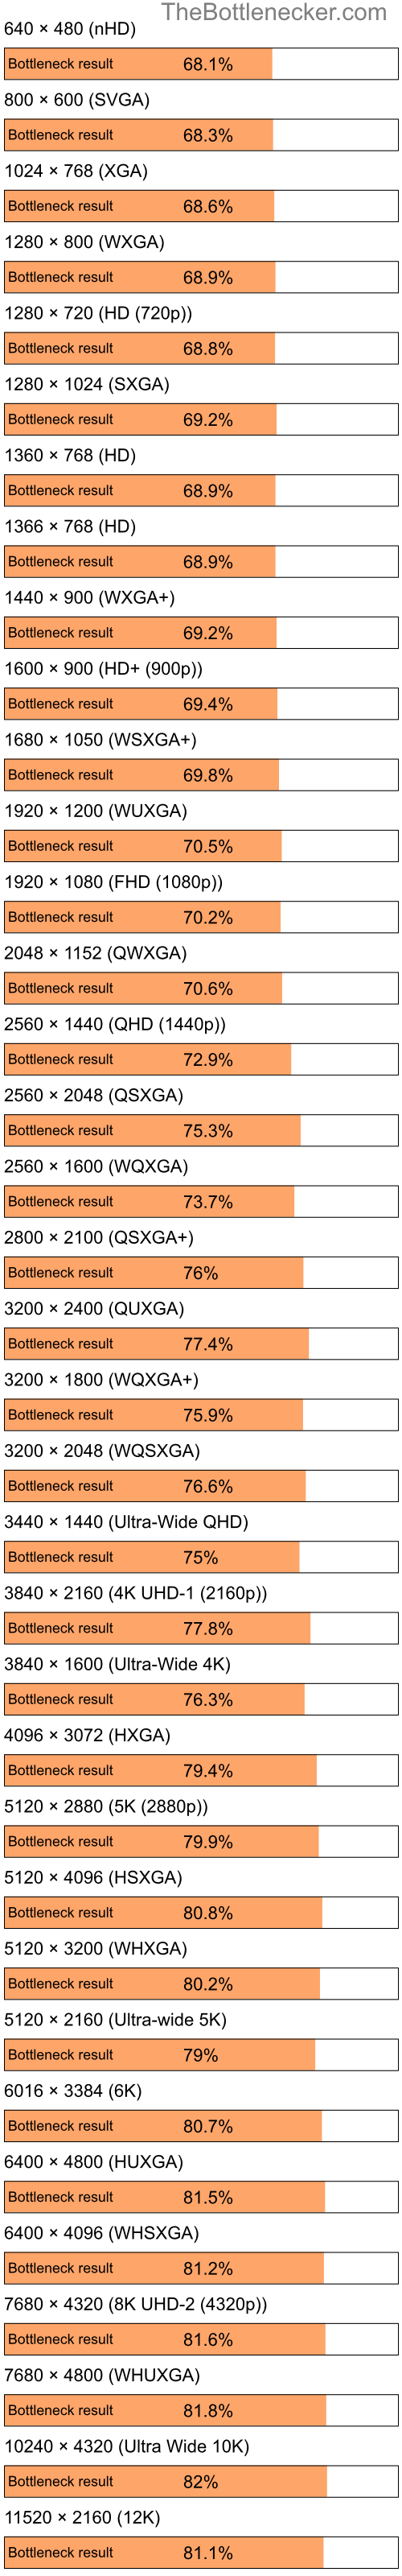 Bottleneck results by resolution for Intel Pentium 4 and NVIDIA GeForce 6800 in Graphic Card Intense Tasks